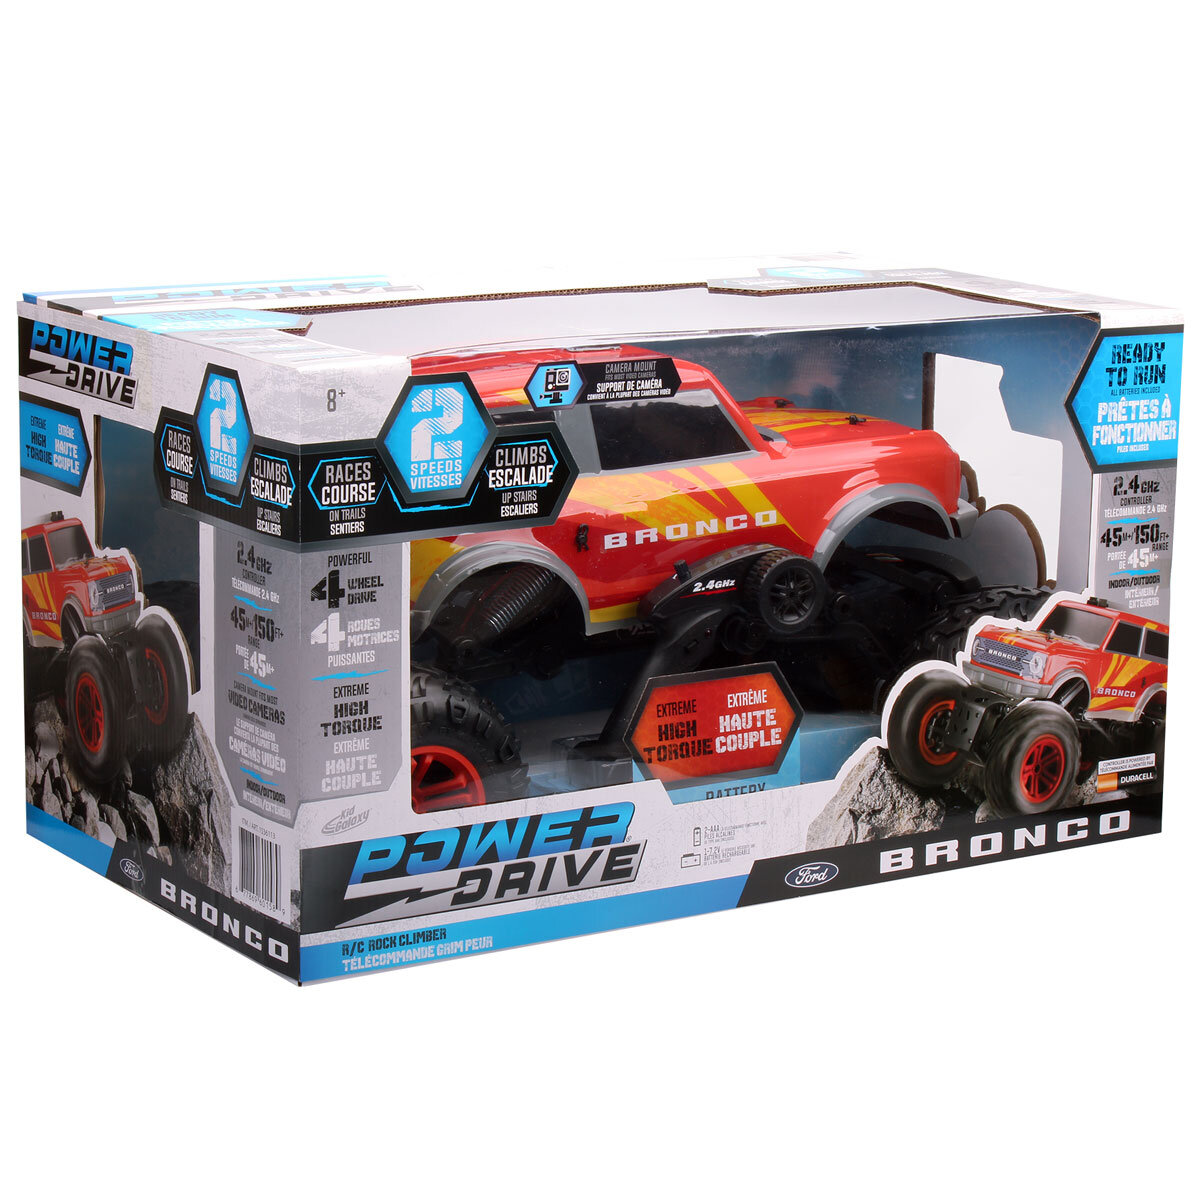 Buy Power Drive Bronco Monster Truck Box Image at Costco.co.uk